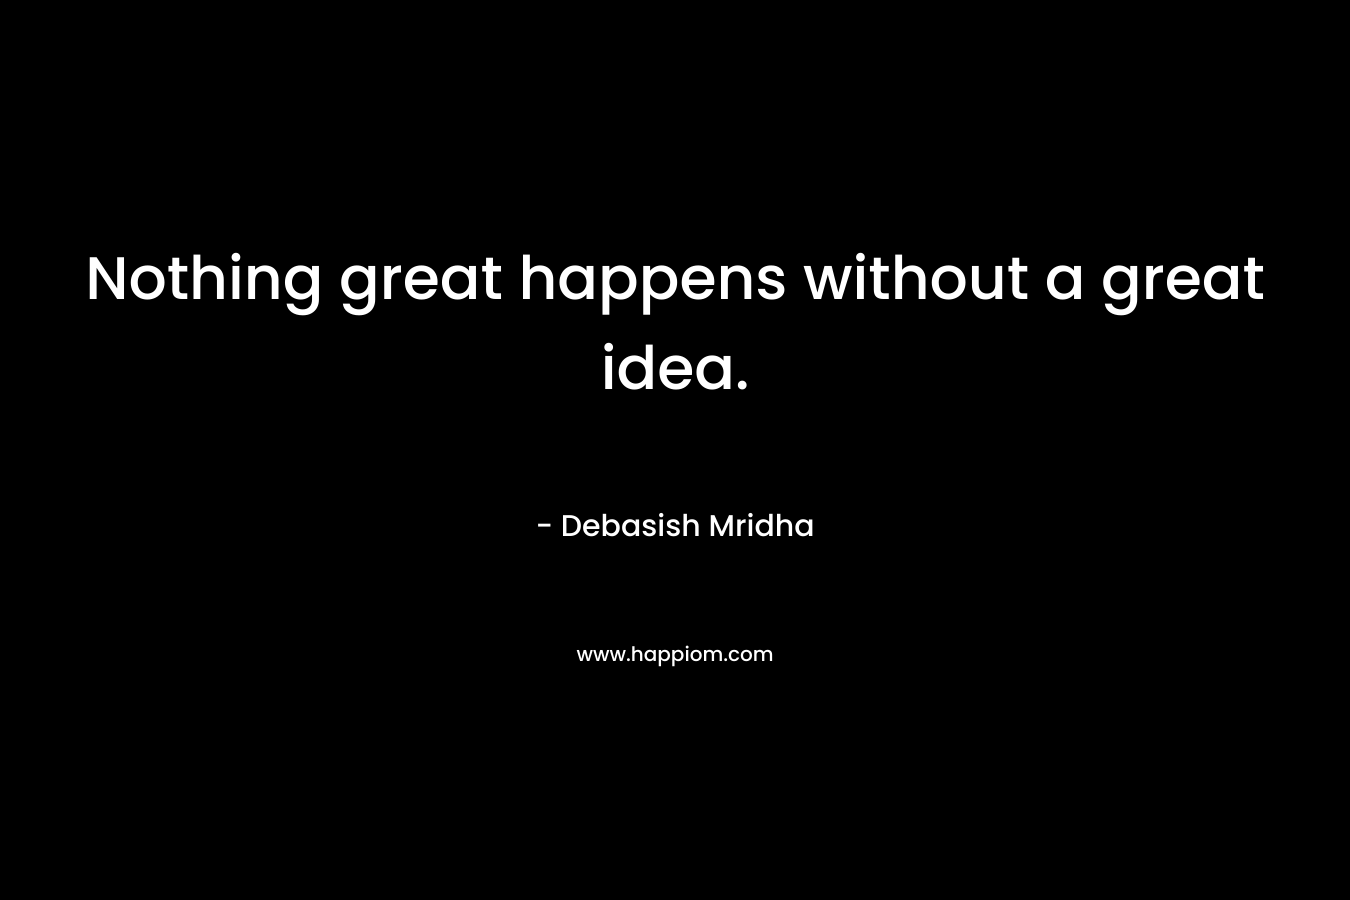 Nothing great happens without a great idea.